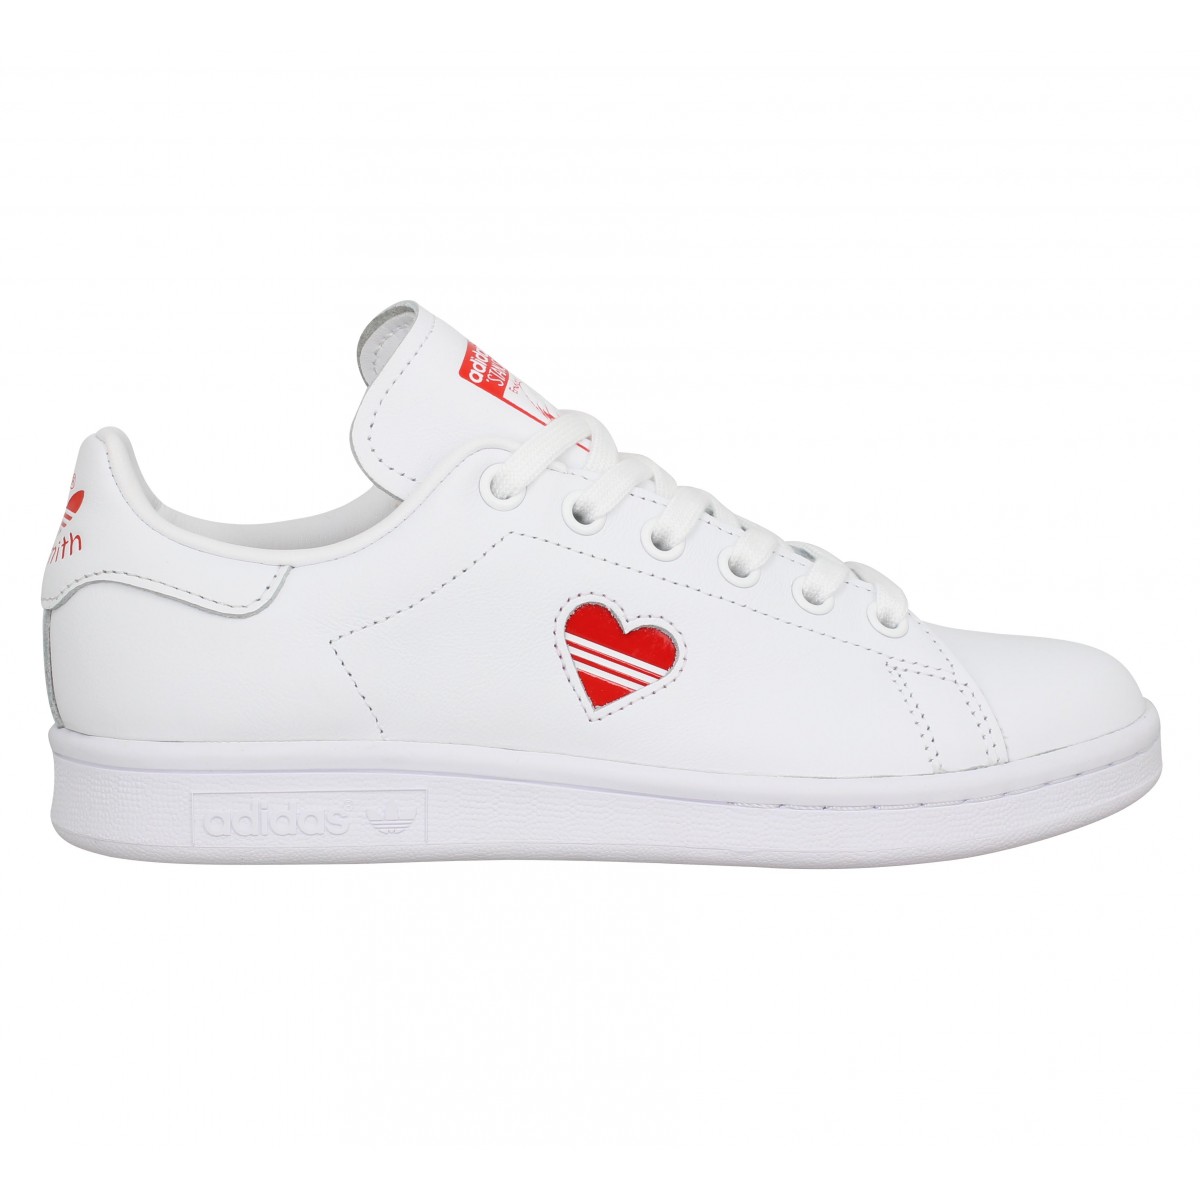 adidas stan smith femme blanche et rouge